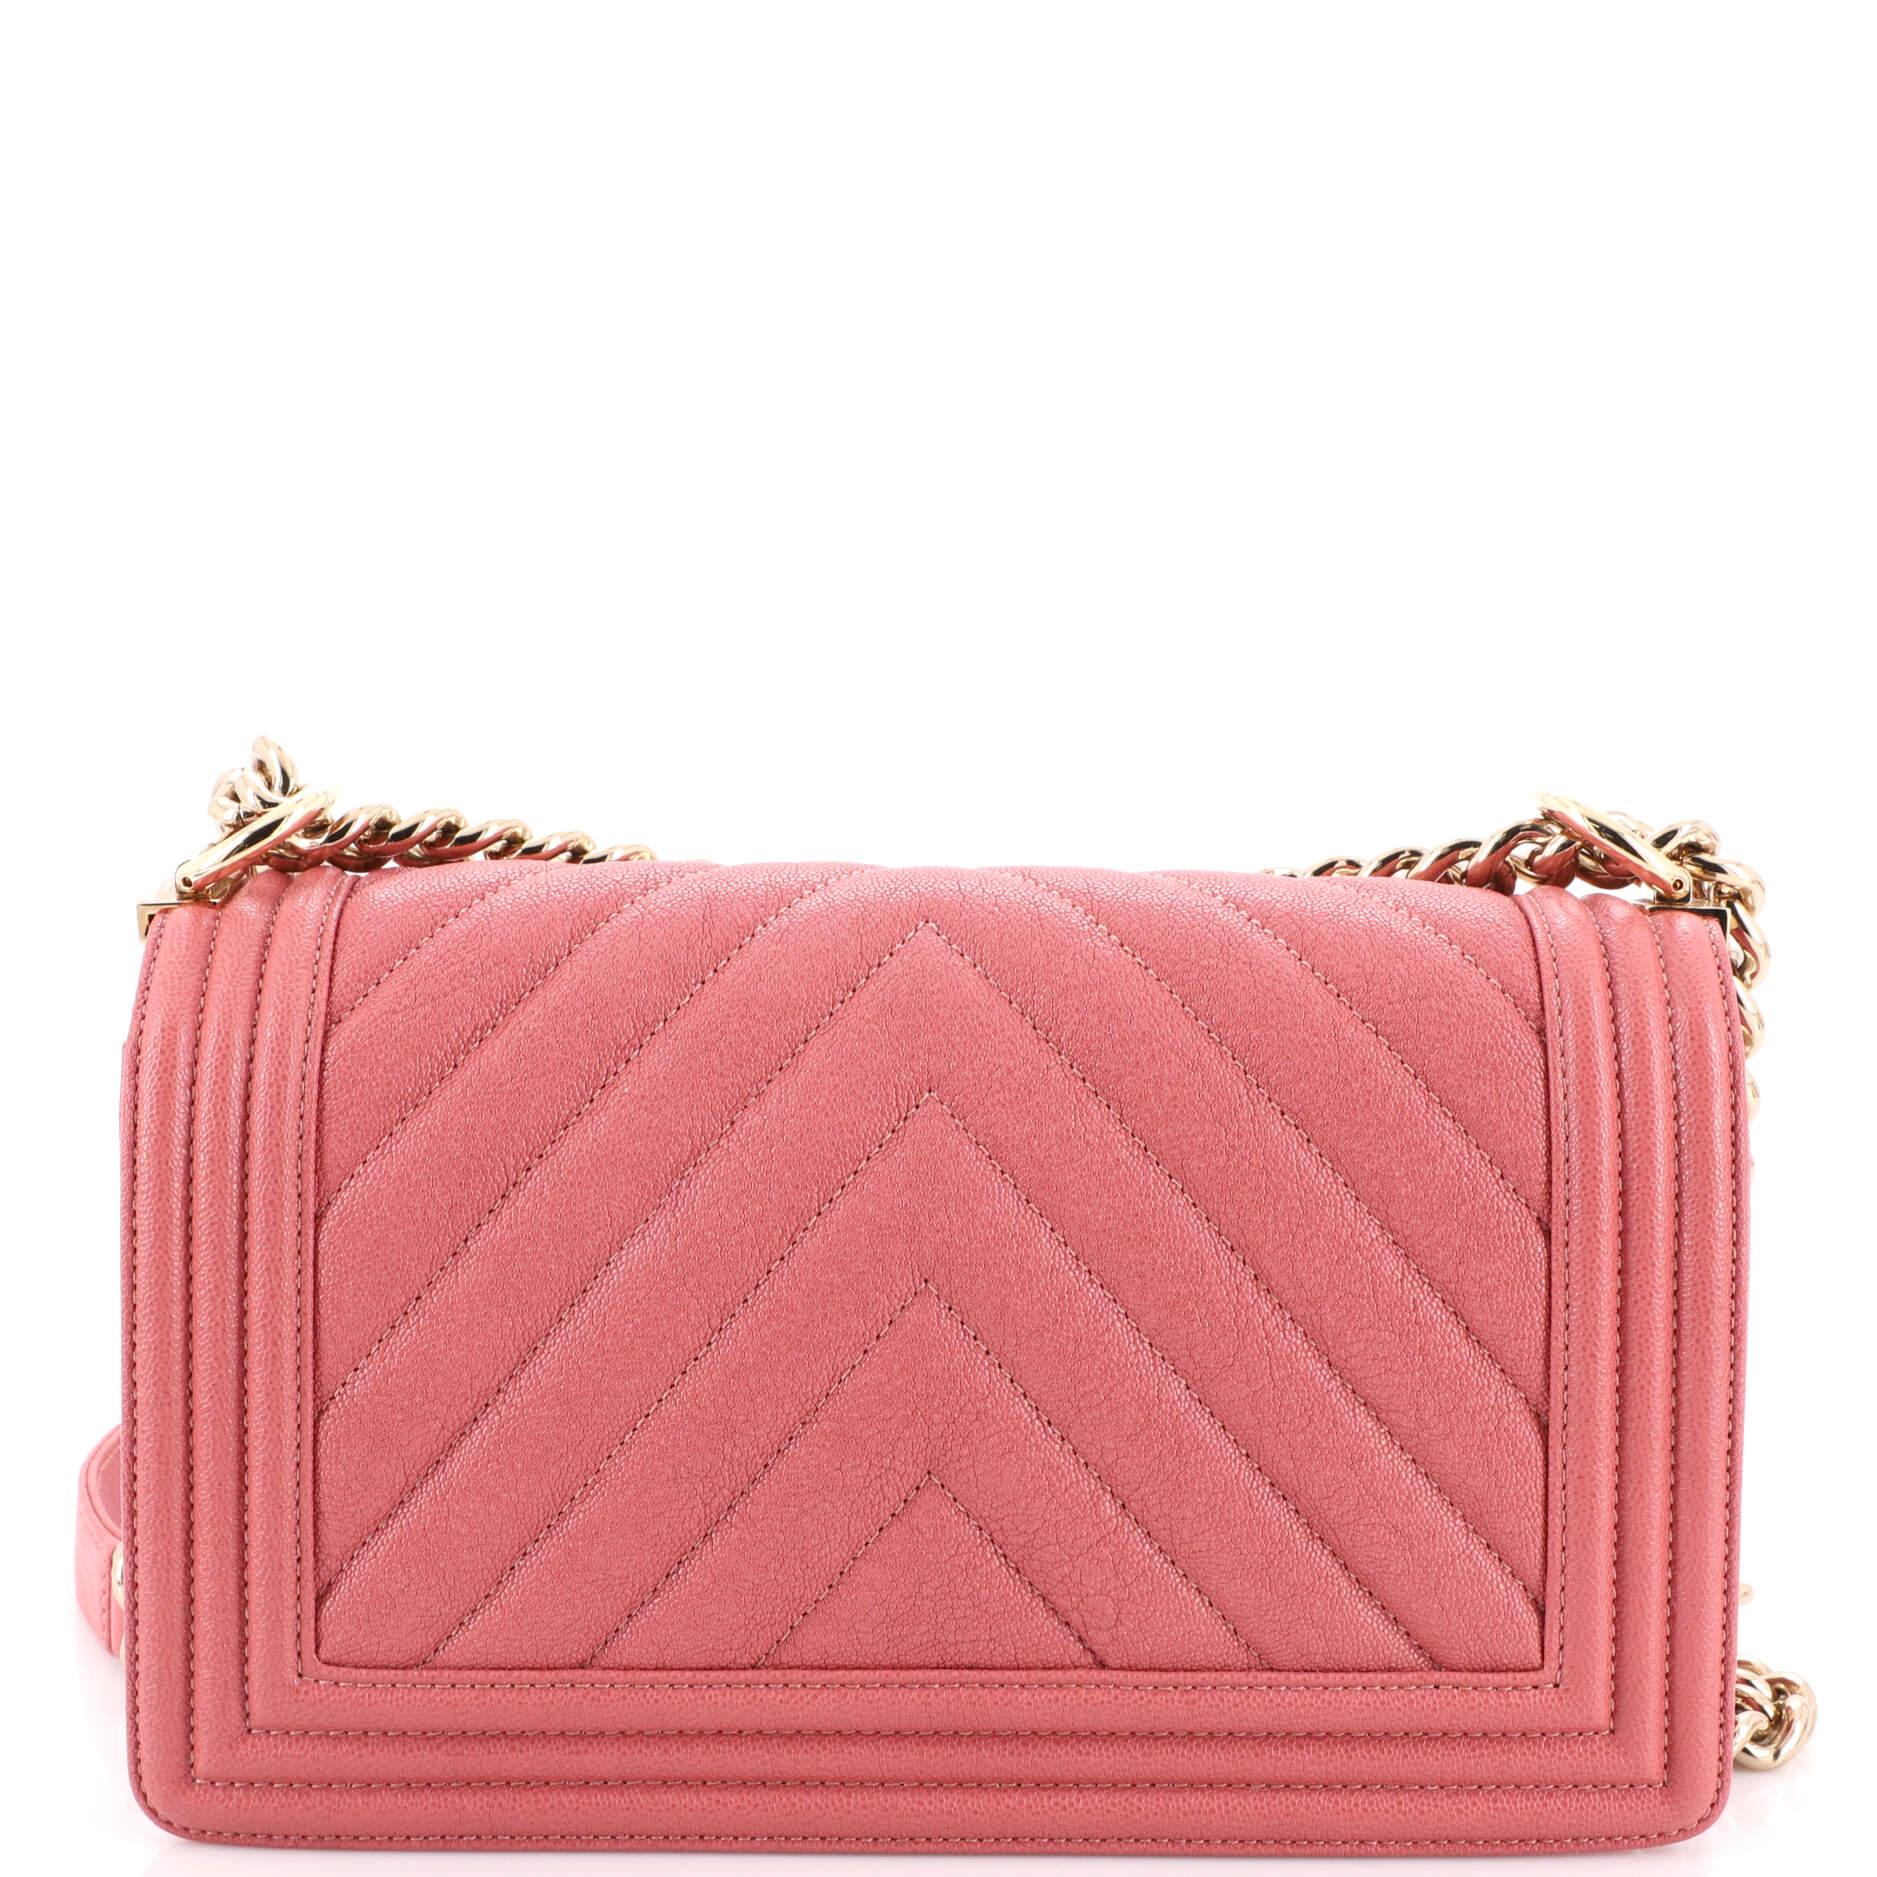 Chanel Boy Flap Bag Chevron Caviar Old Medium In Good Condition For Sale In NY, NY